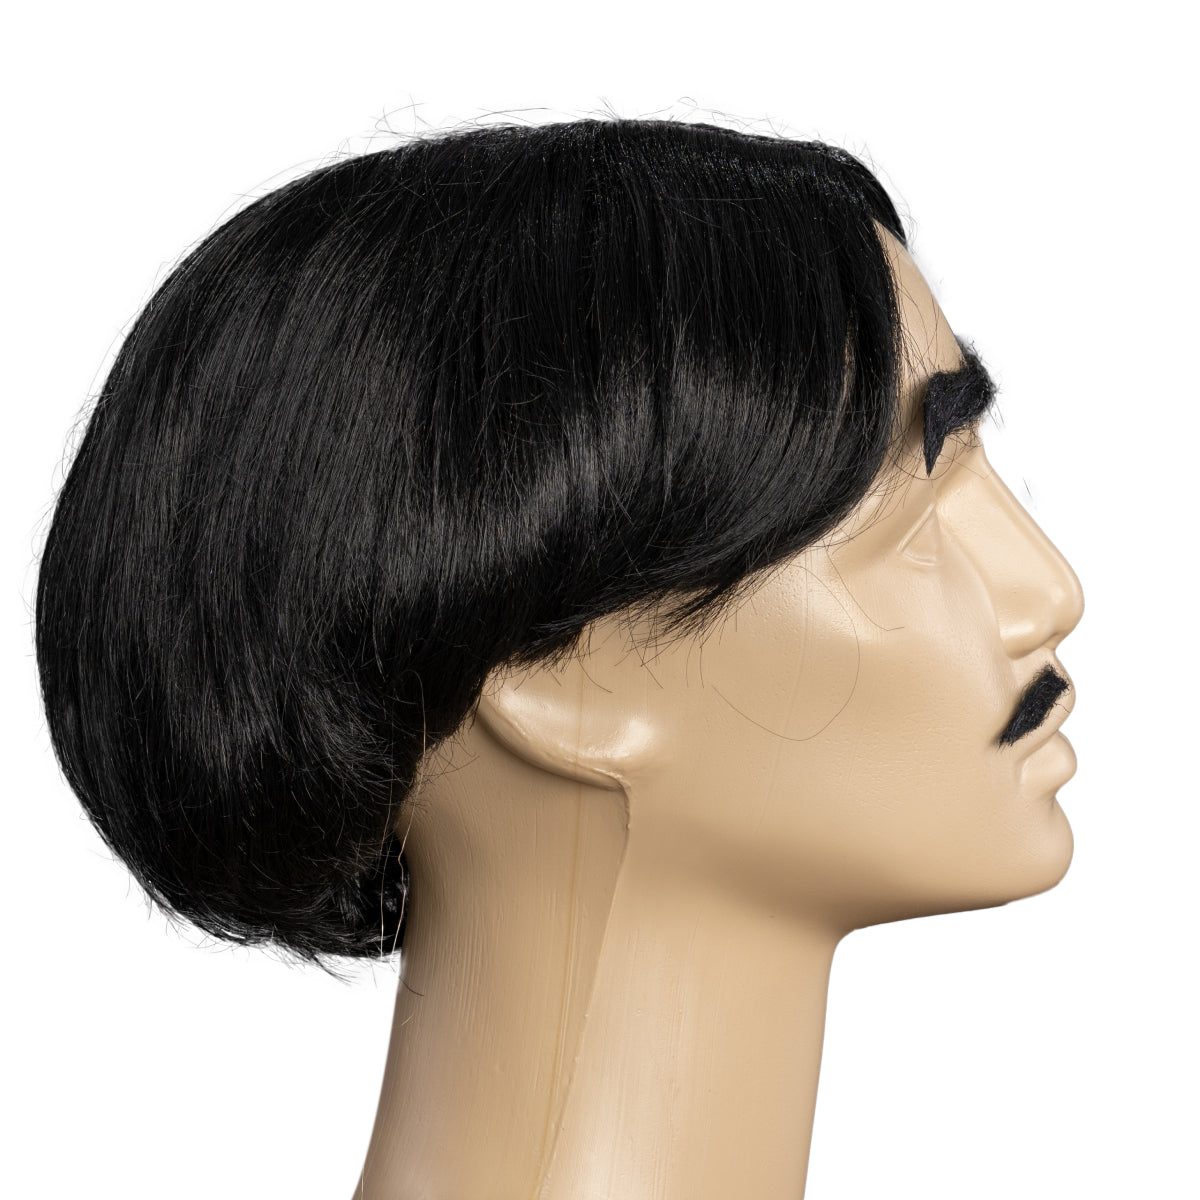 Gomez Adams Family Wig, Mustache, and Eyebrow Set for Halloween Costume Accessory and Cosplay Right Look